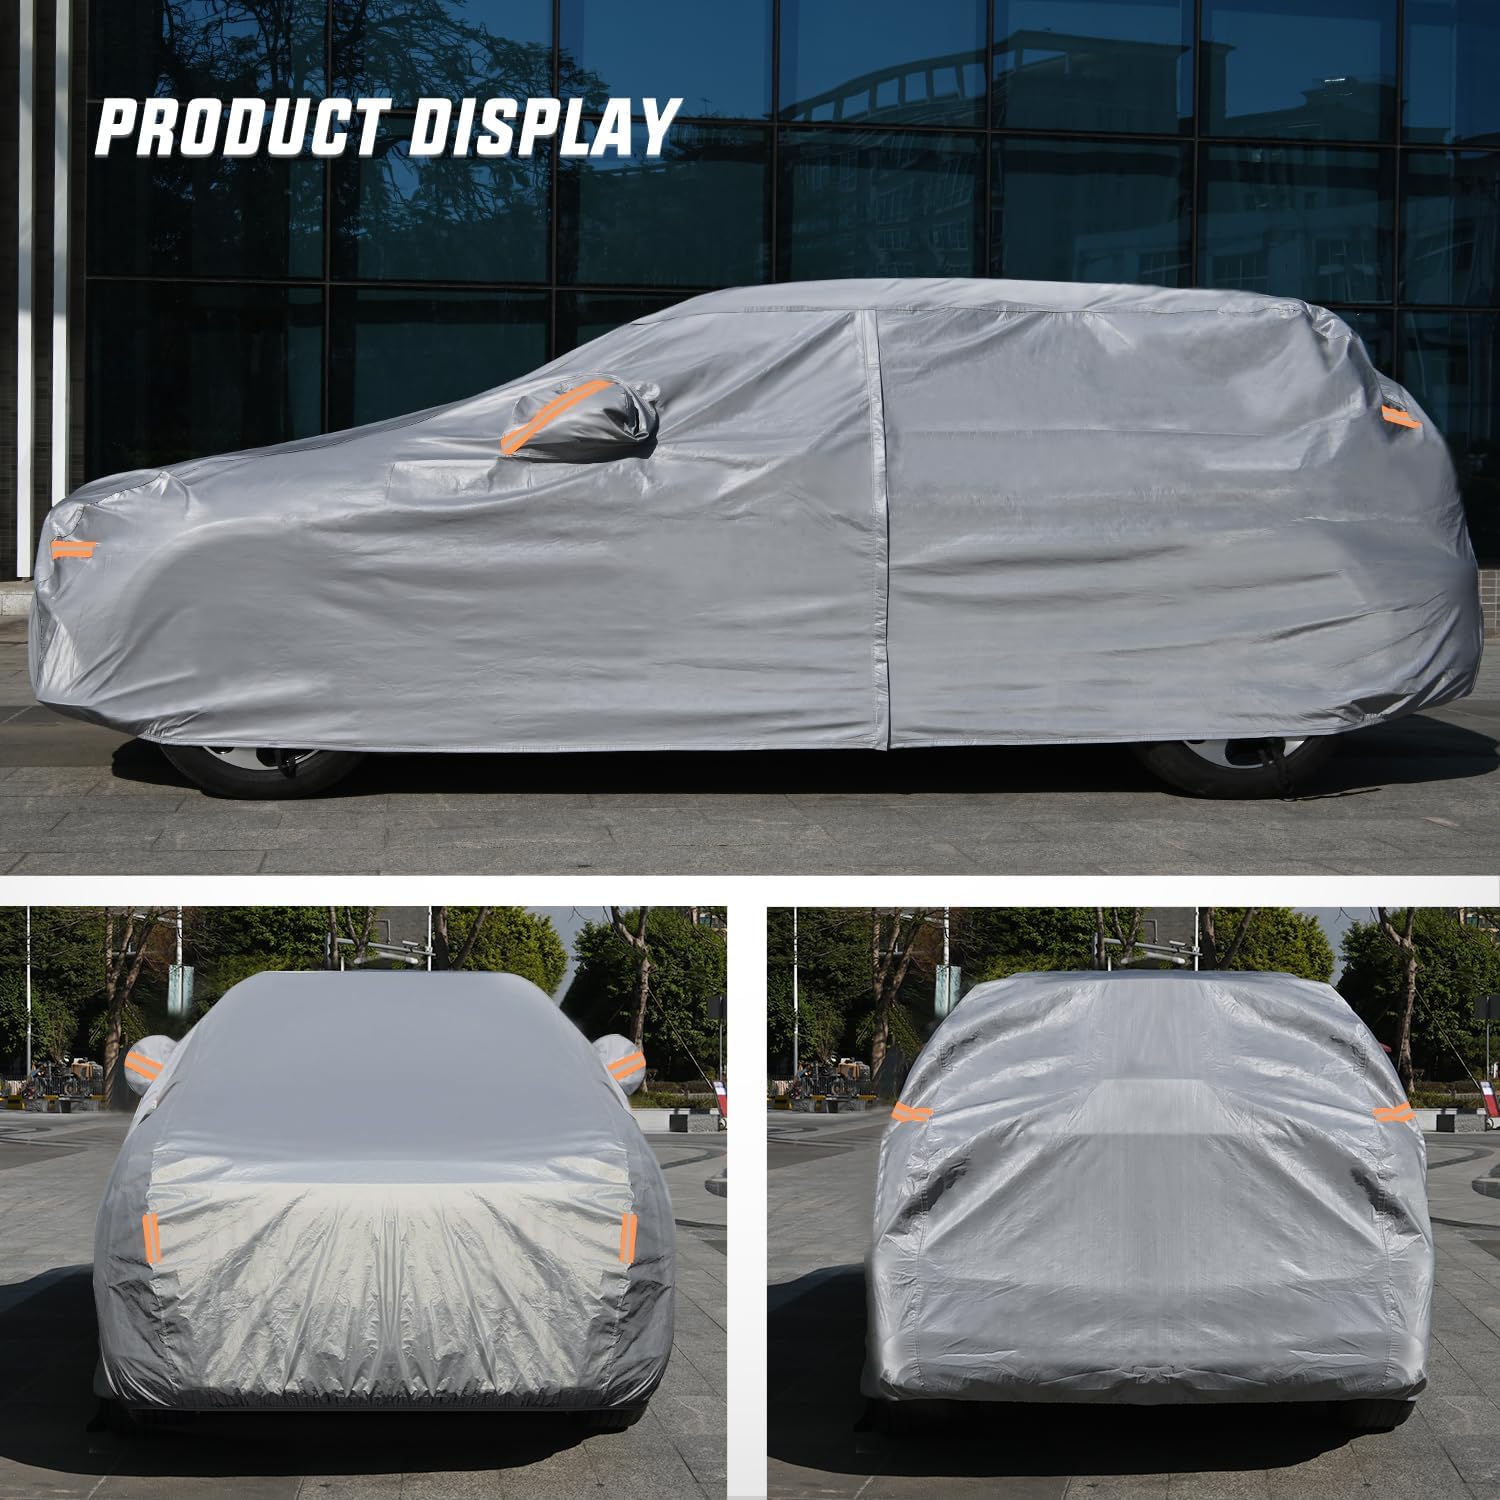 Universal Fit for SUV Jeep-Length (191" to 200") Car Cover UV Protection Nilight